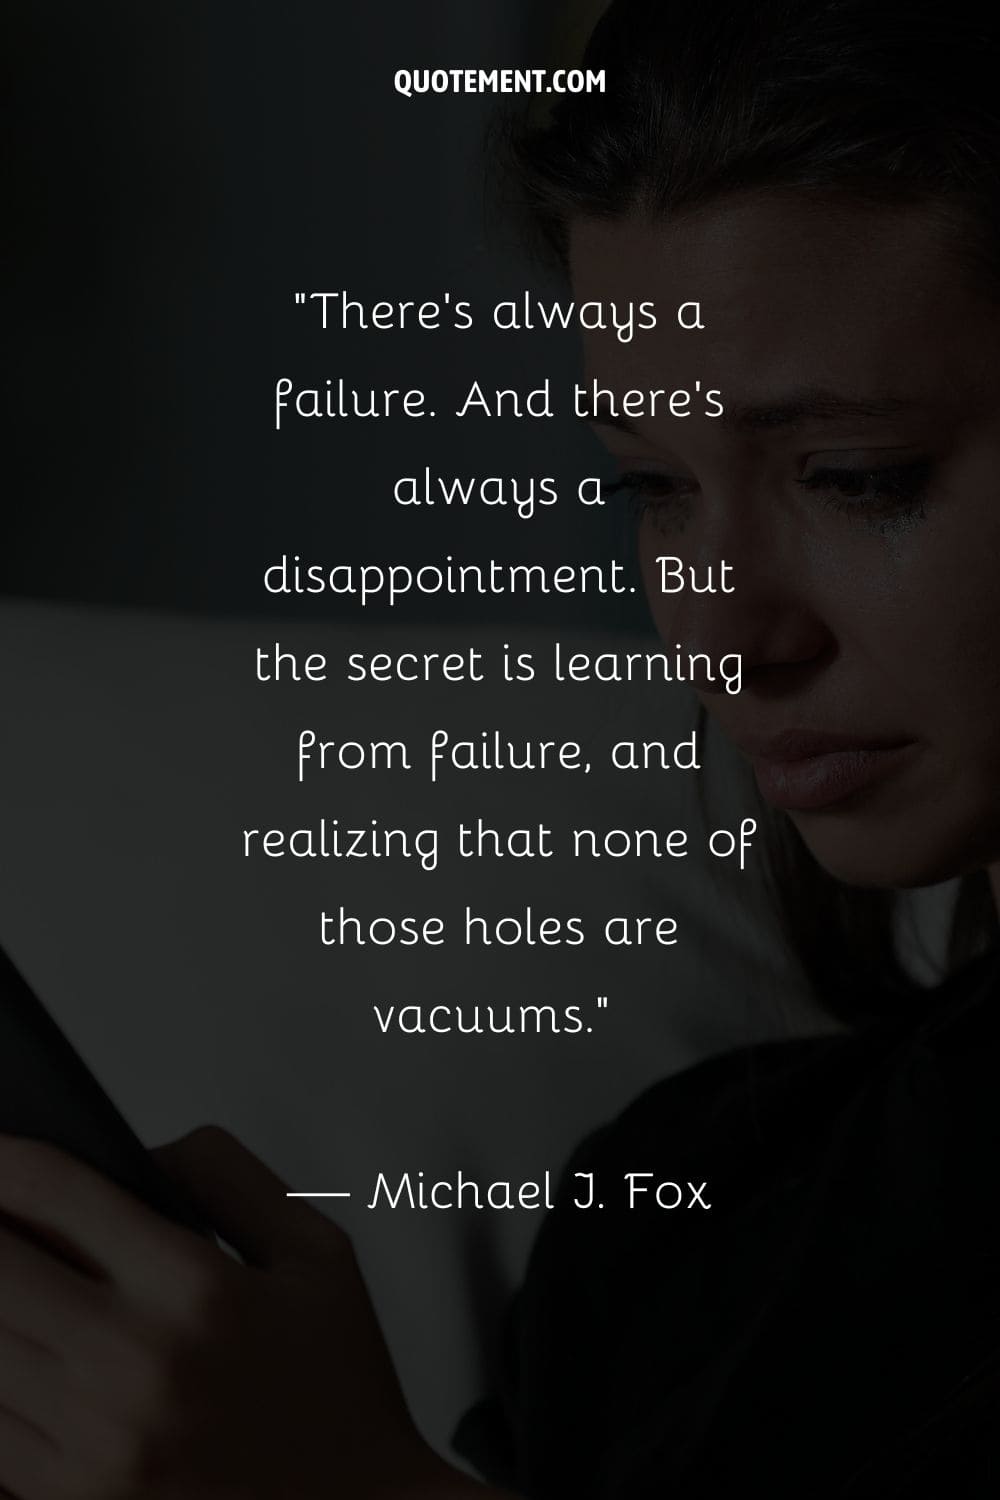 There’s always a failure. And there’s always a disappointment